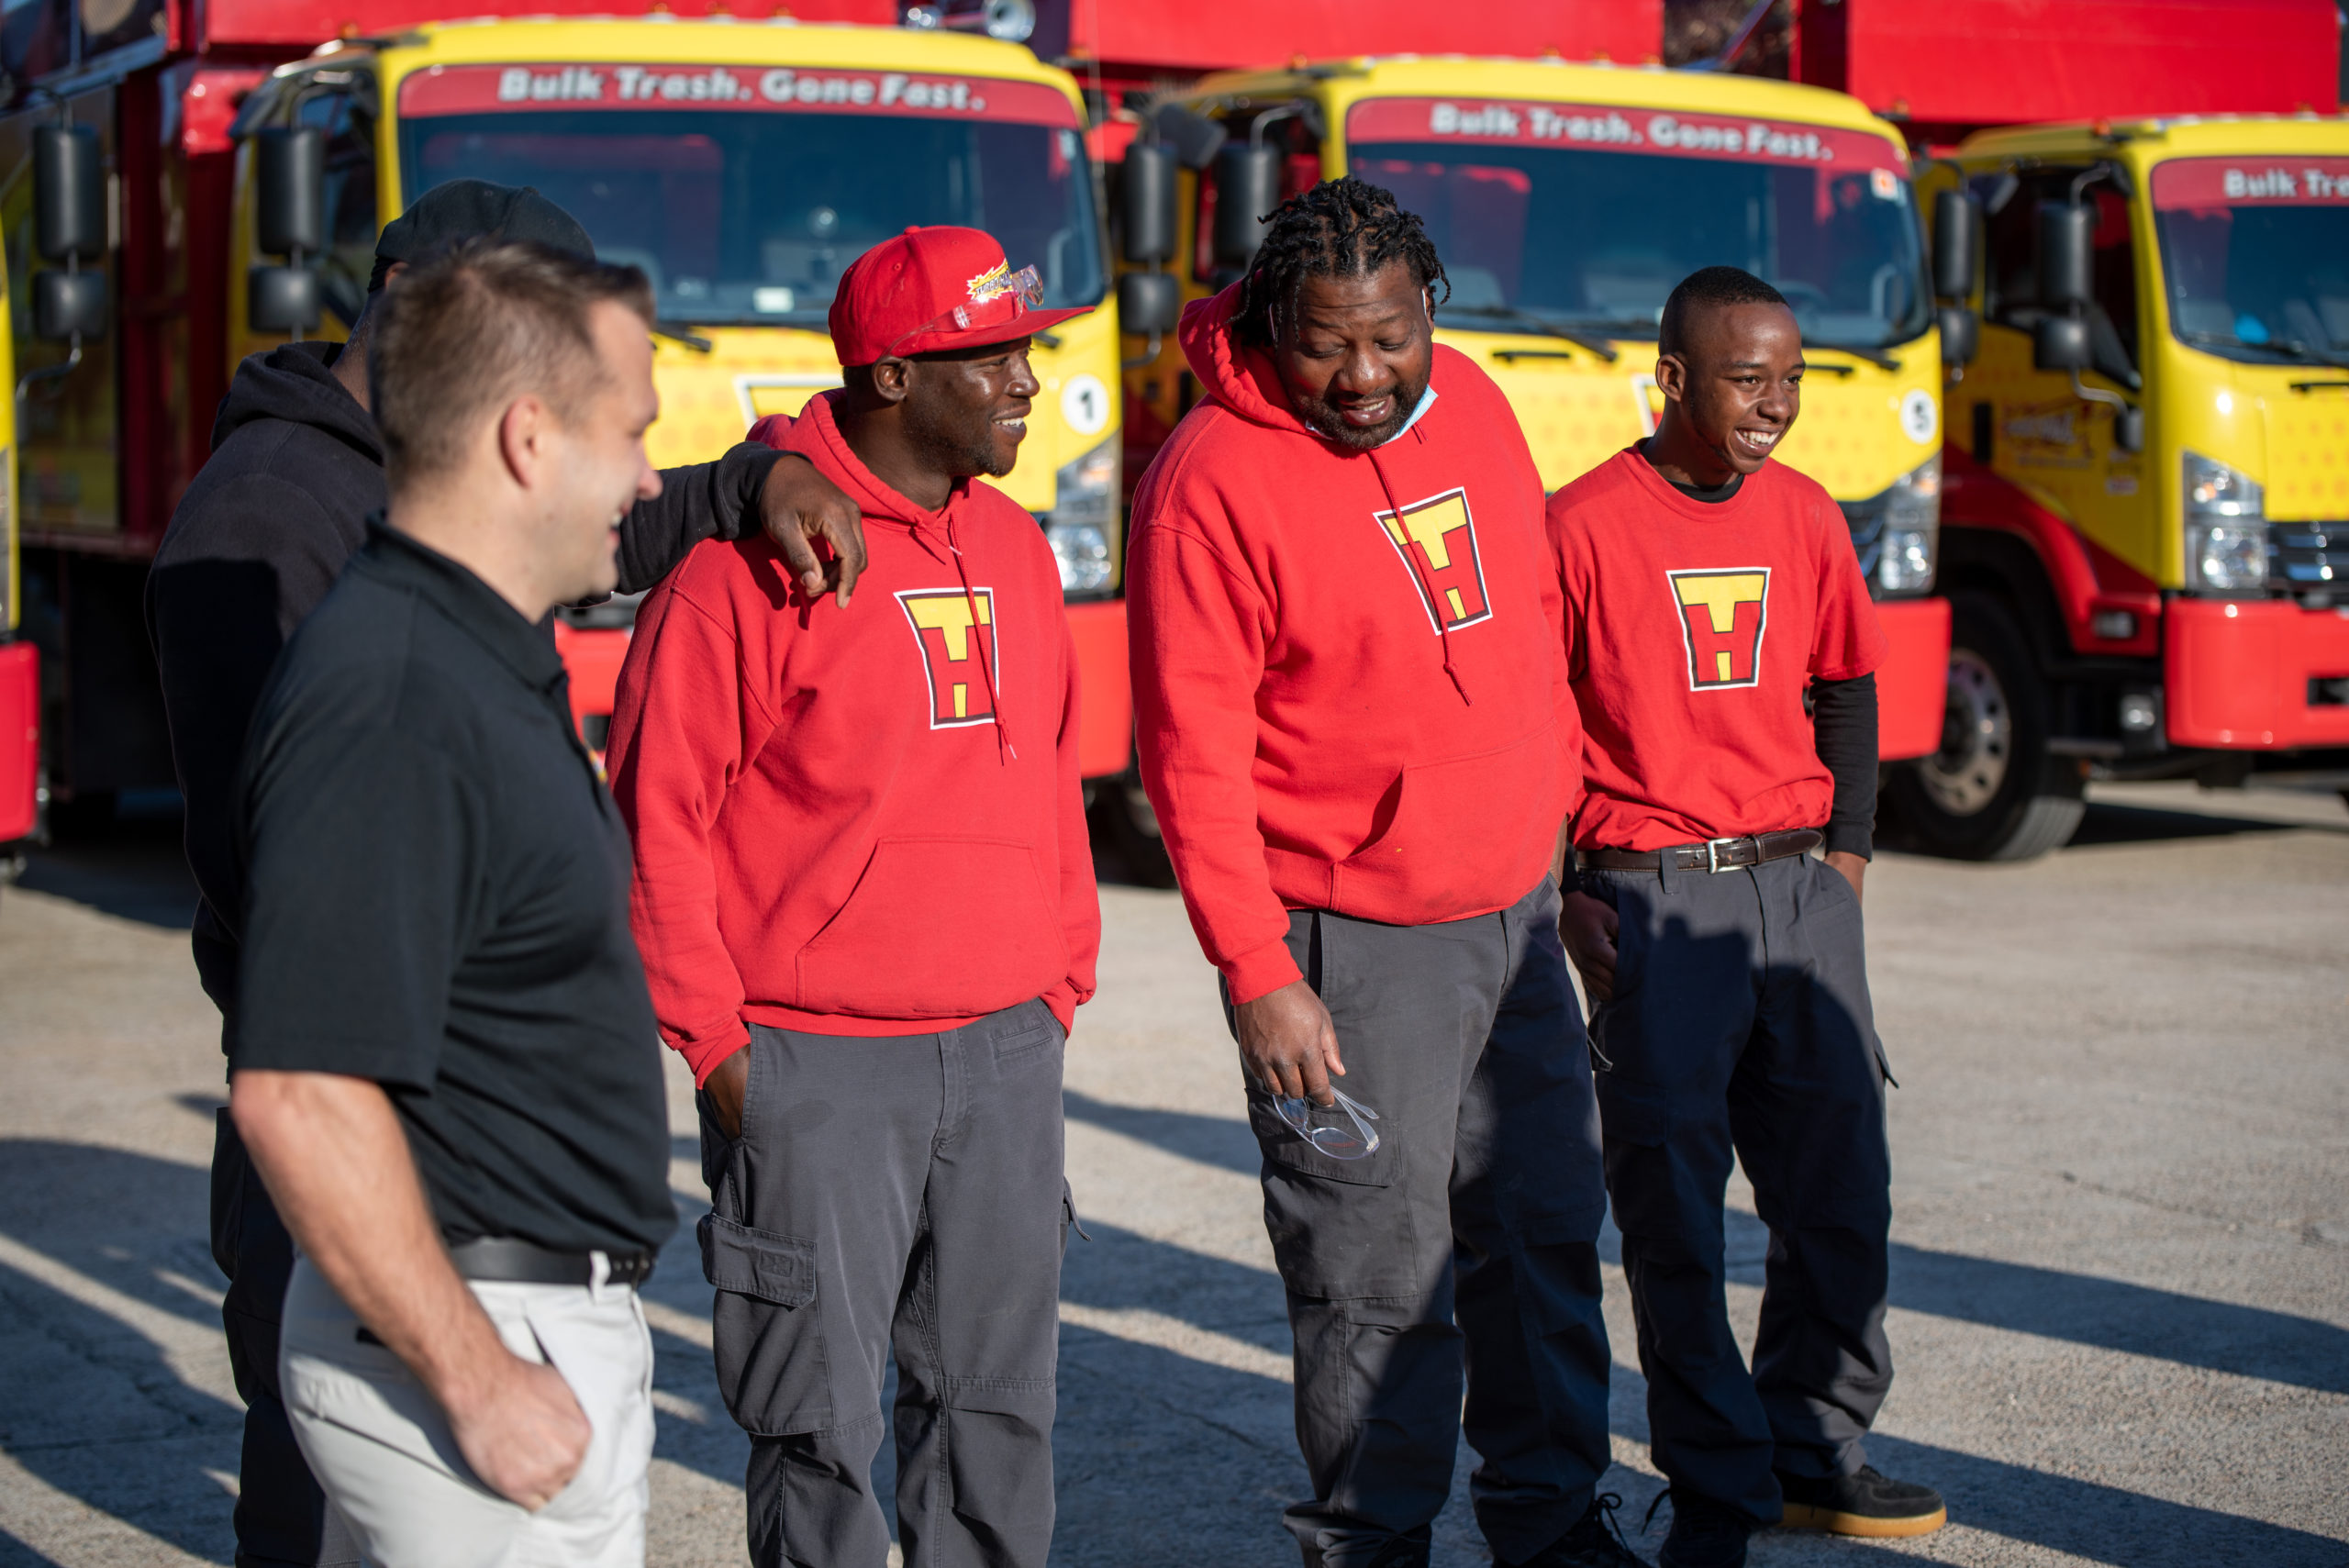 TurboHaul employees stand in front of their trucks in Riverdale, MD